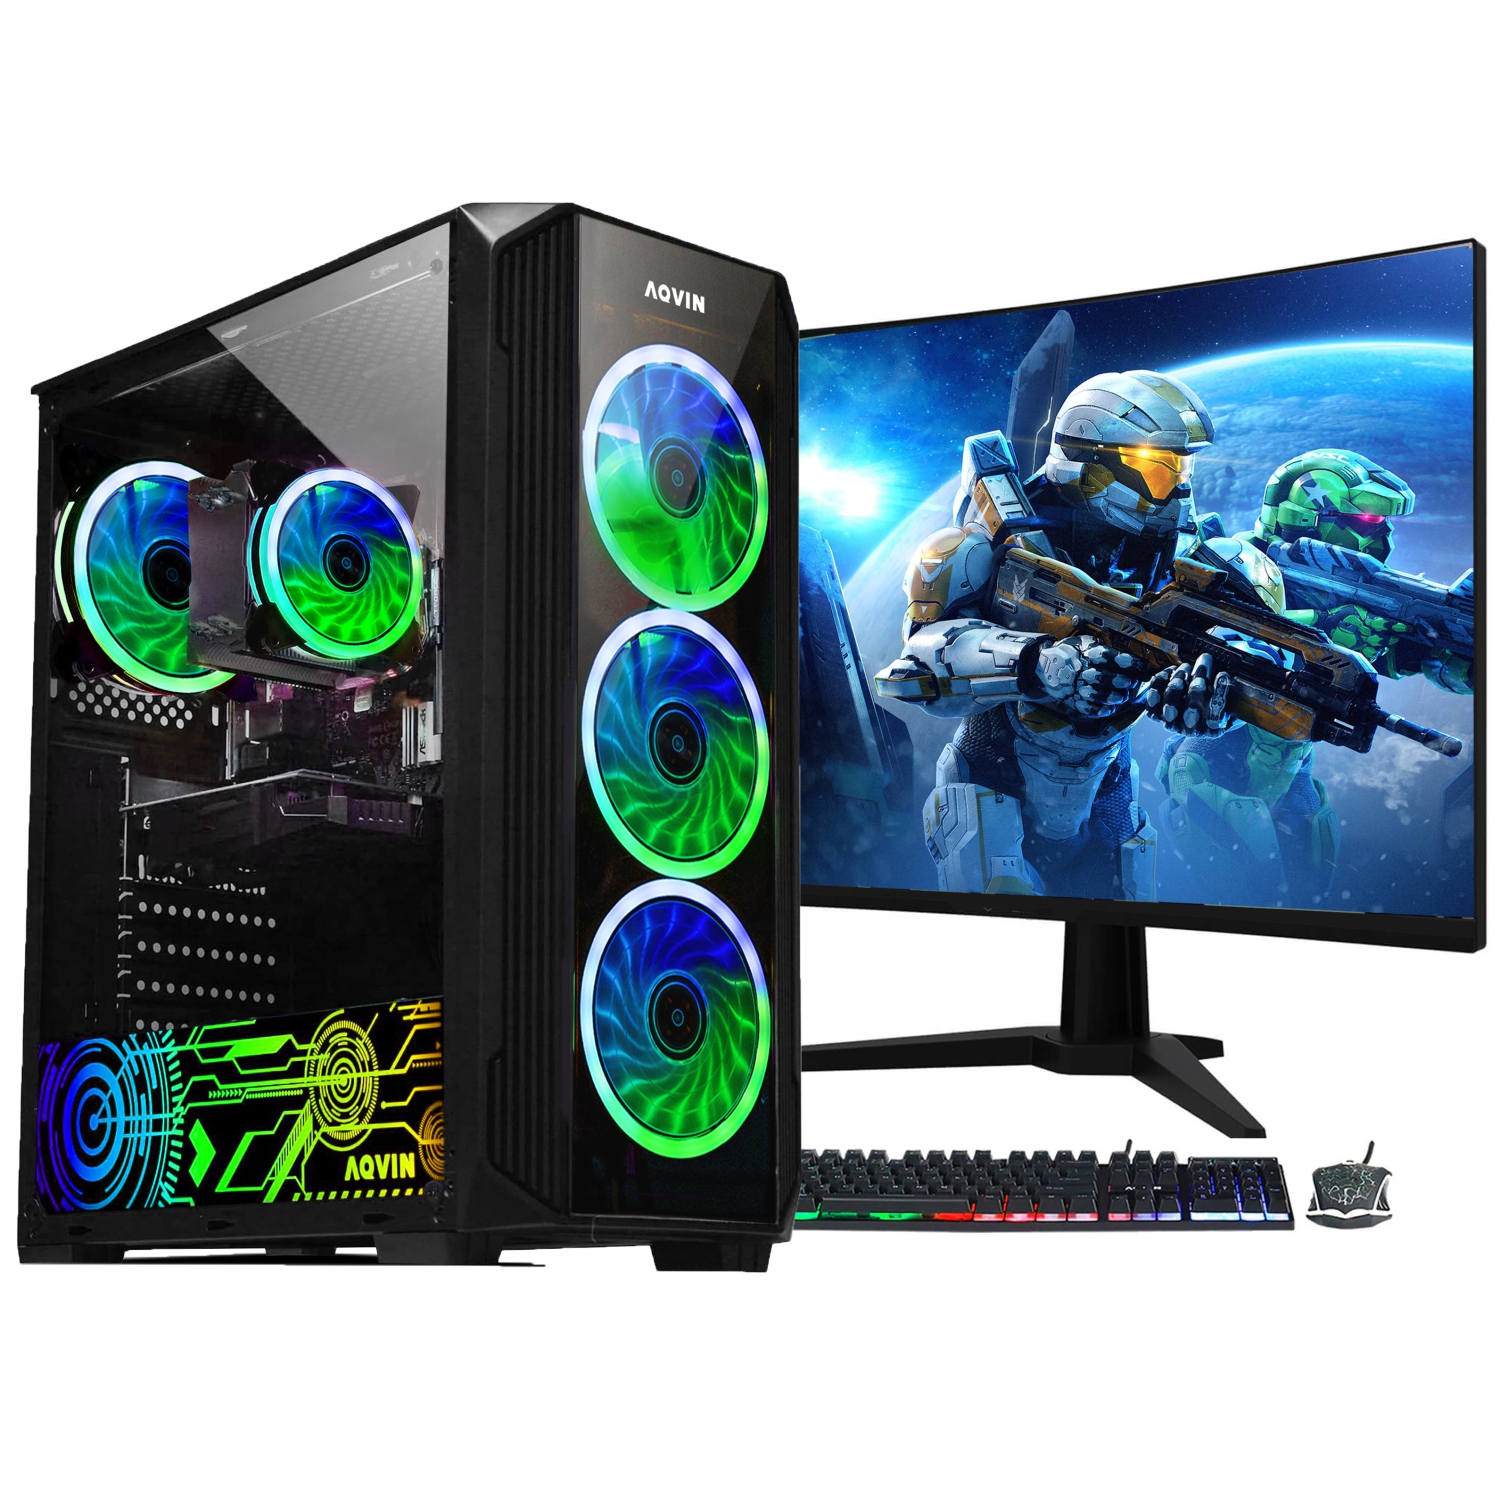 Refurbished (Excellent) AQVIN Gaming PC Desktop Computer Tower (Intel i7/1TB SSD/32GB RAM/GeForce RTX 3060/Windows 10 Pro) New 27 inch Curved Gaming Monitor - Only at Best Buy